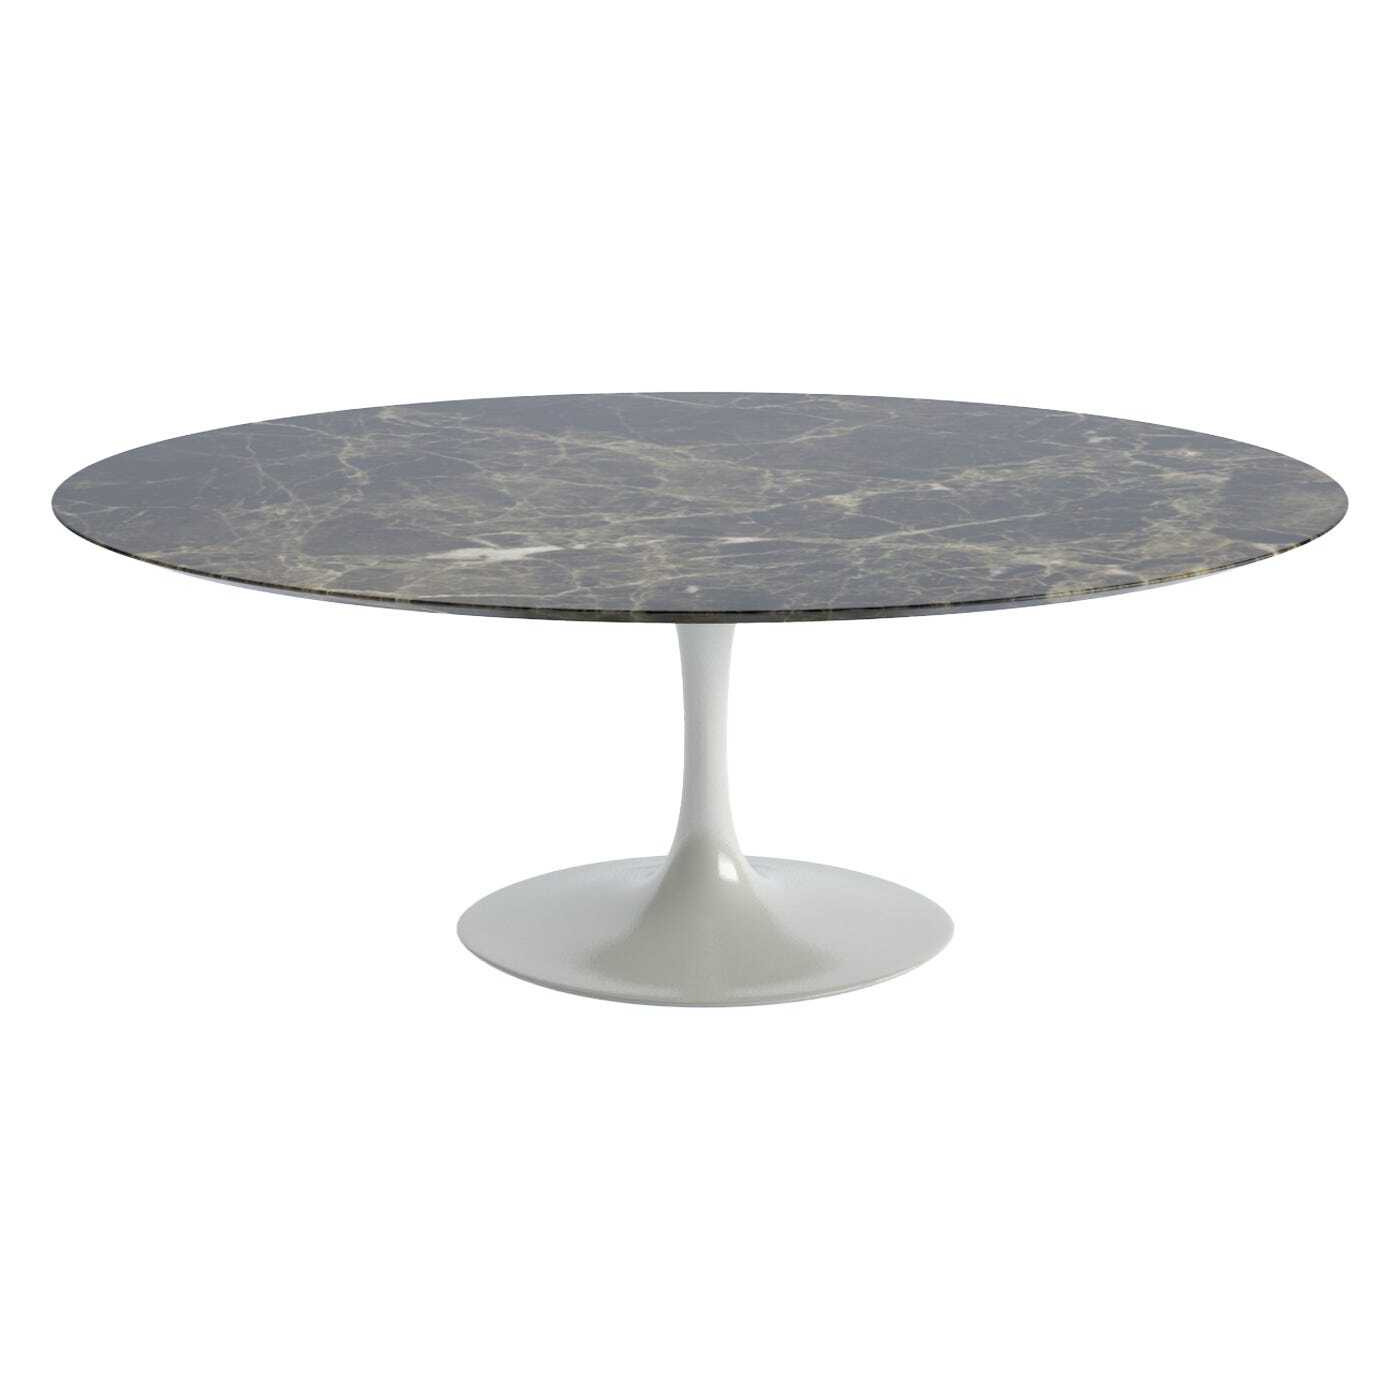 Knoll Saarinen Dining Table with White Base in Brown Emperador 198cm - image 1